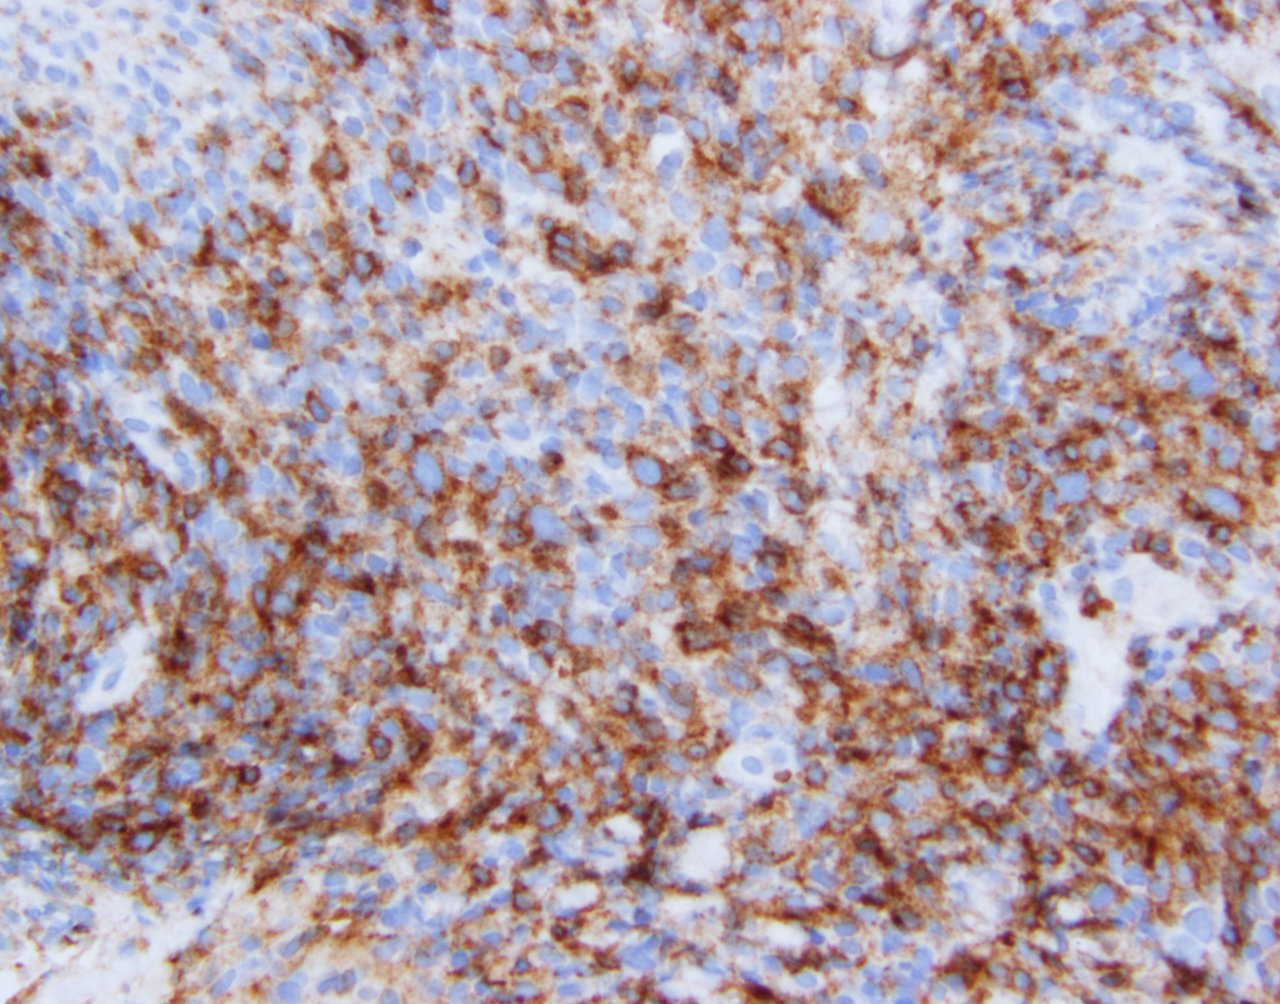 Neoplastic T cells showing strong CD4 expression